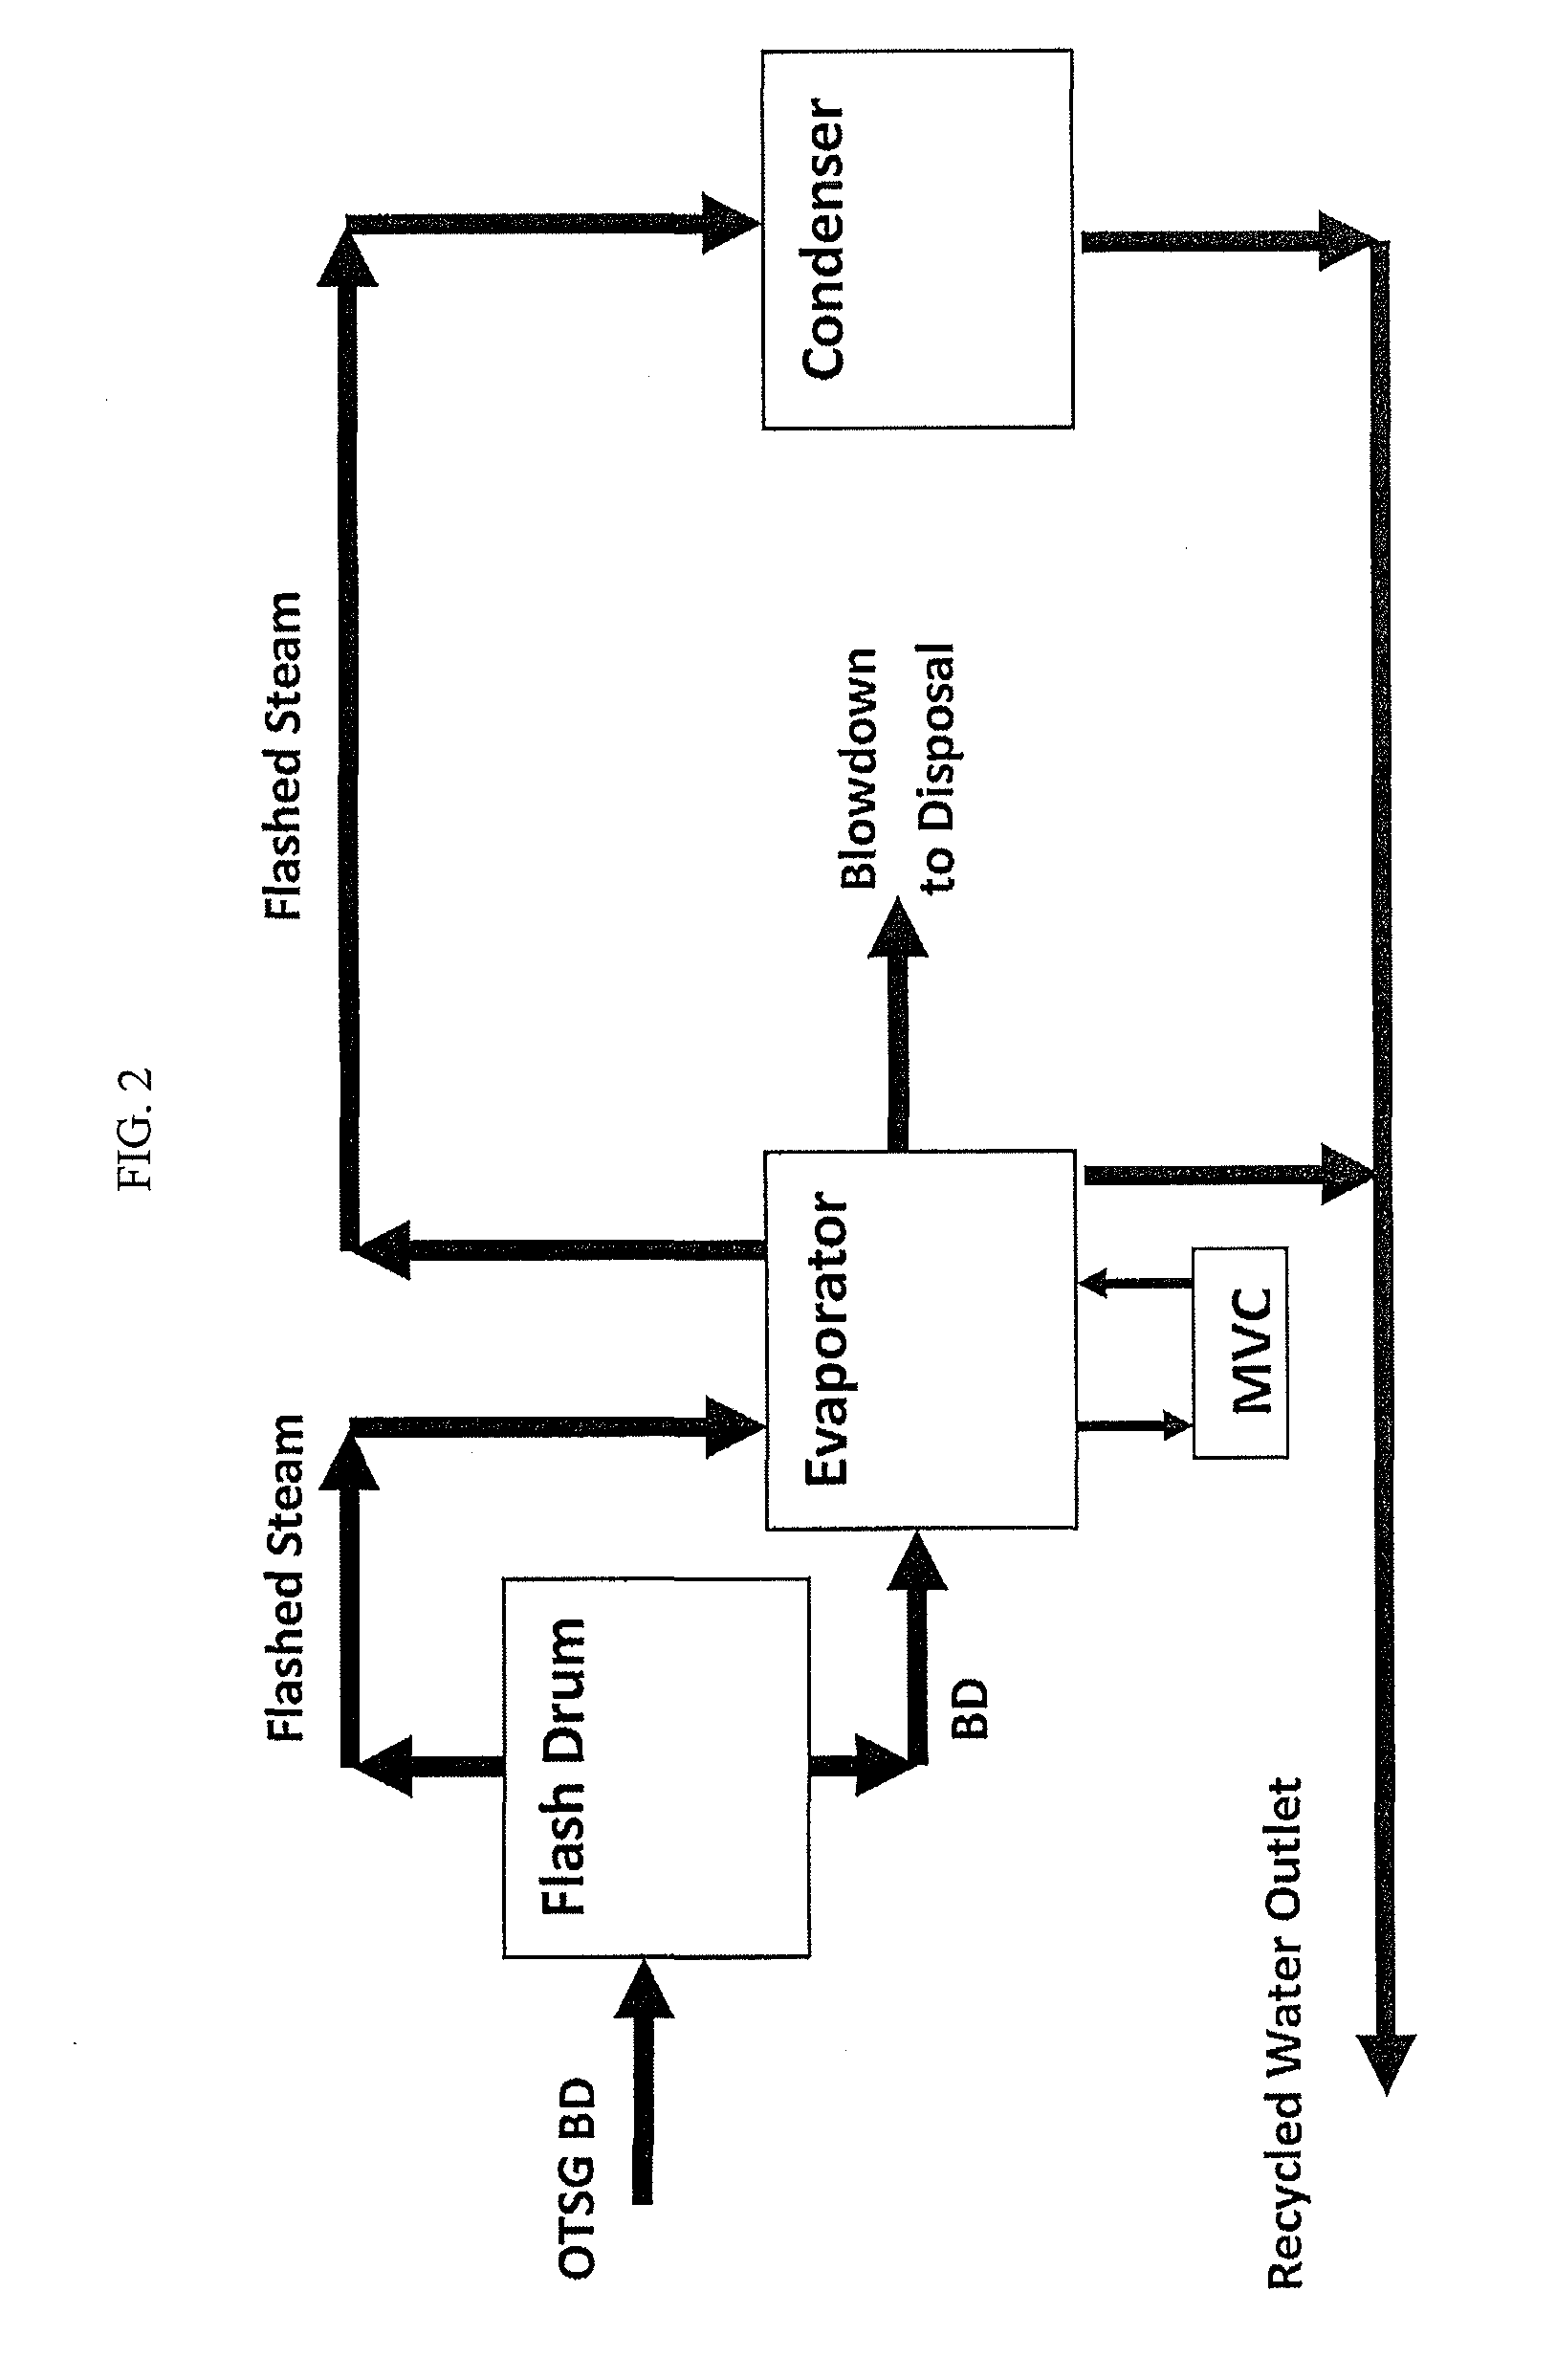 Method and apparatus for recycling water